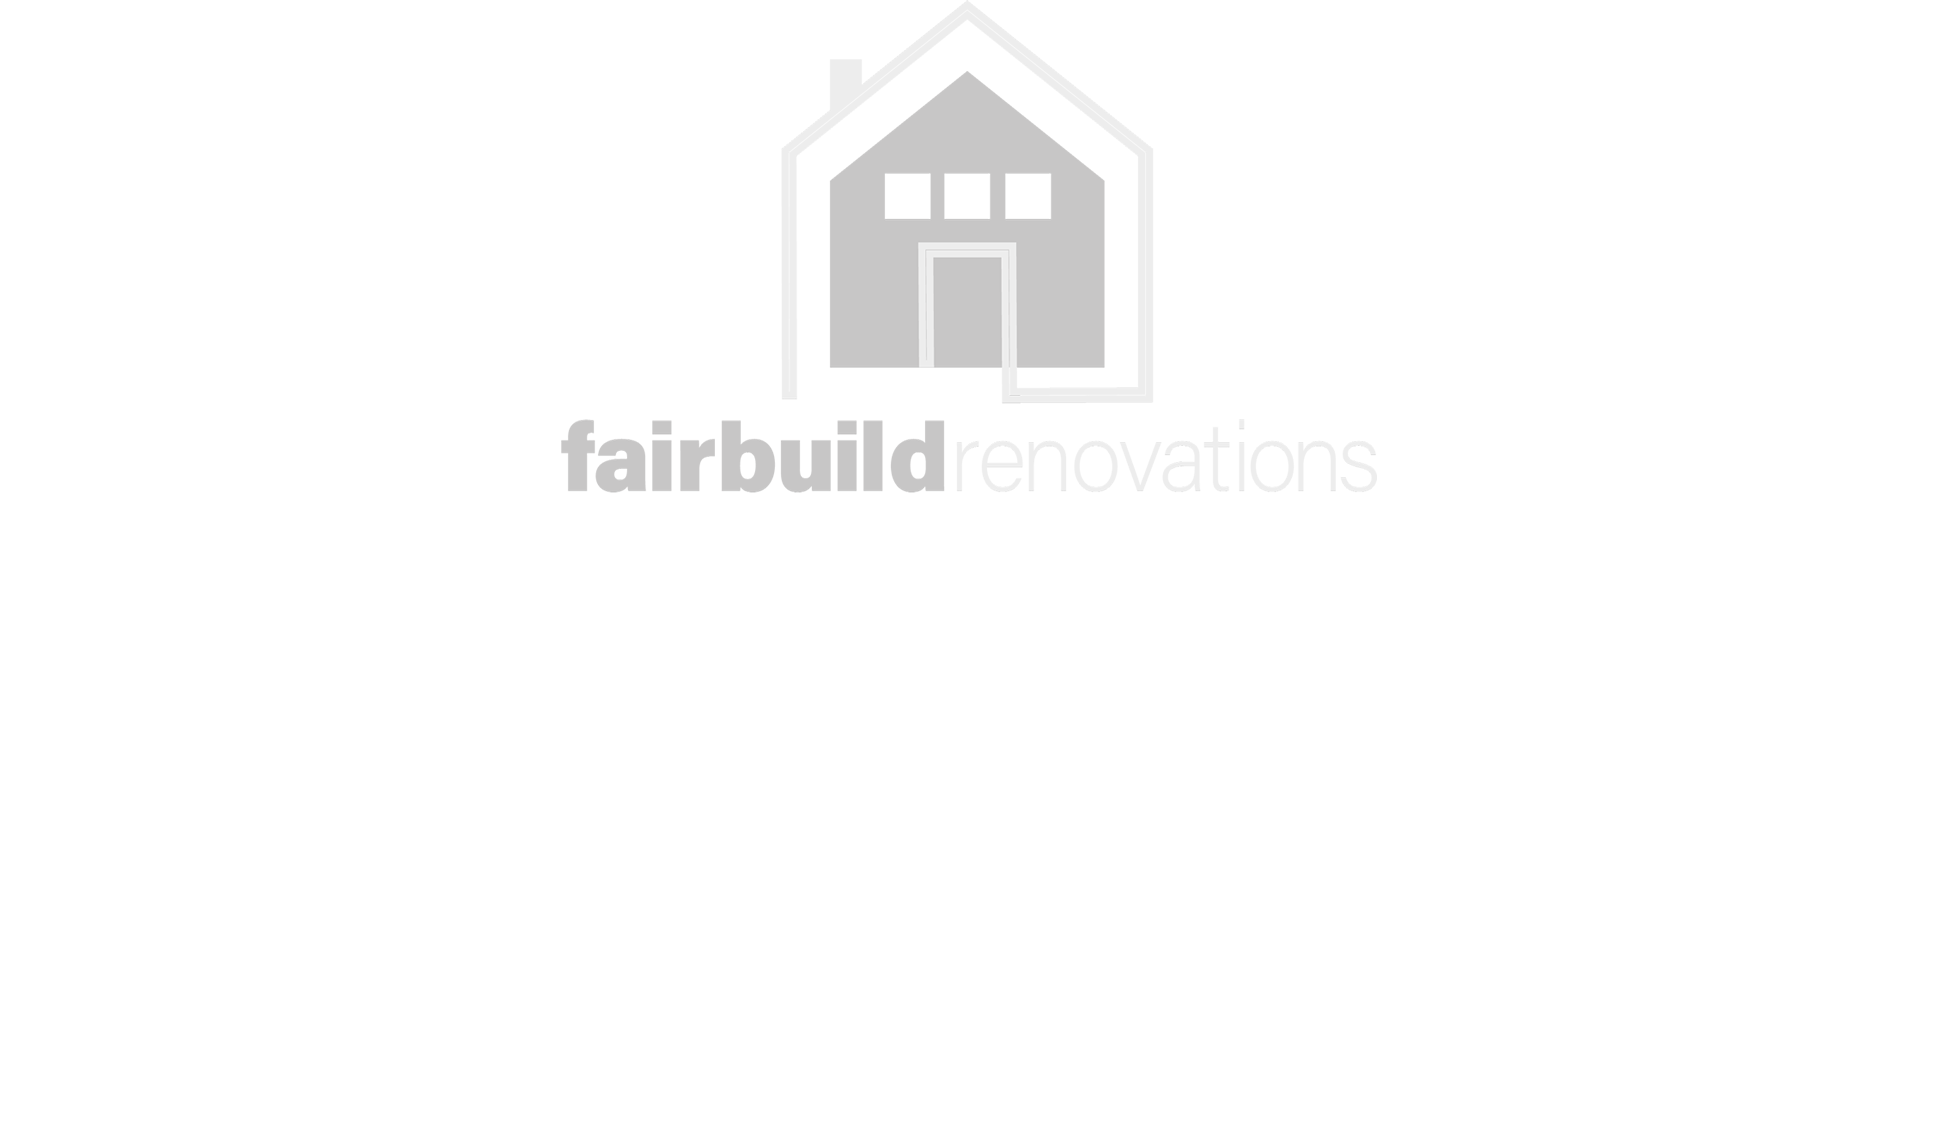 Fairbuild renovations. New website under construction. email: info@fairbuildrenovations.co.uk telephone: 01773 441464